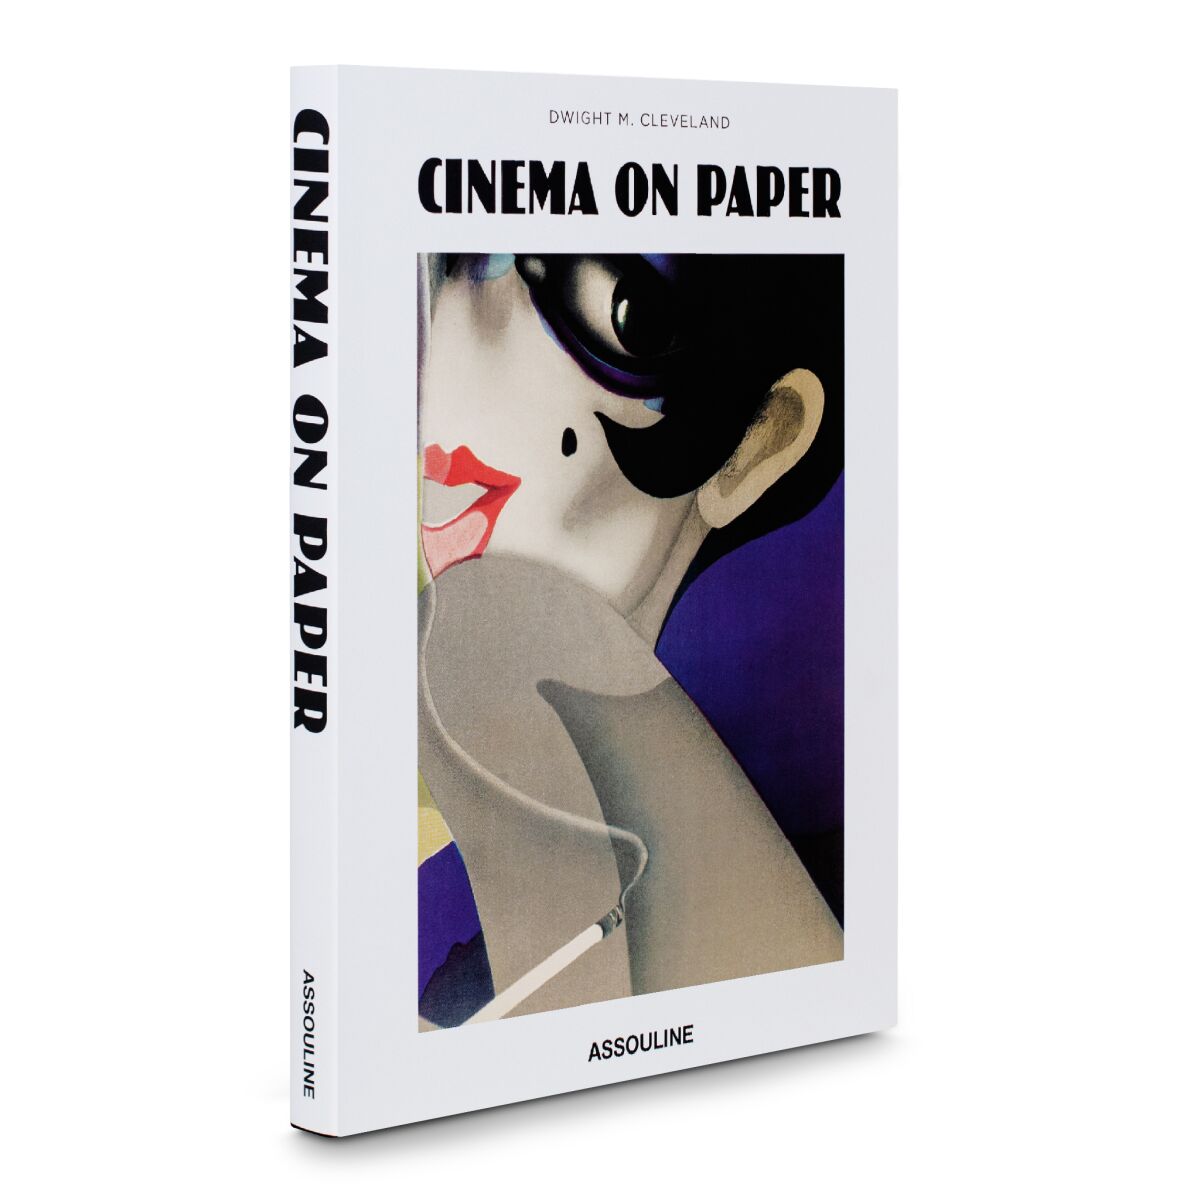 A gorgeous collection "Cinema on Paper" by Dwight M. Cleveland gathers together more than 100 vividly designed film posters from top-of-the-line publisher Assouline that display not only classic American items but posters from overseas purveyors like Cuba, Italy, Poland and the Netherlands. $95.